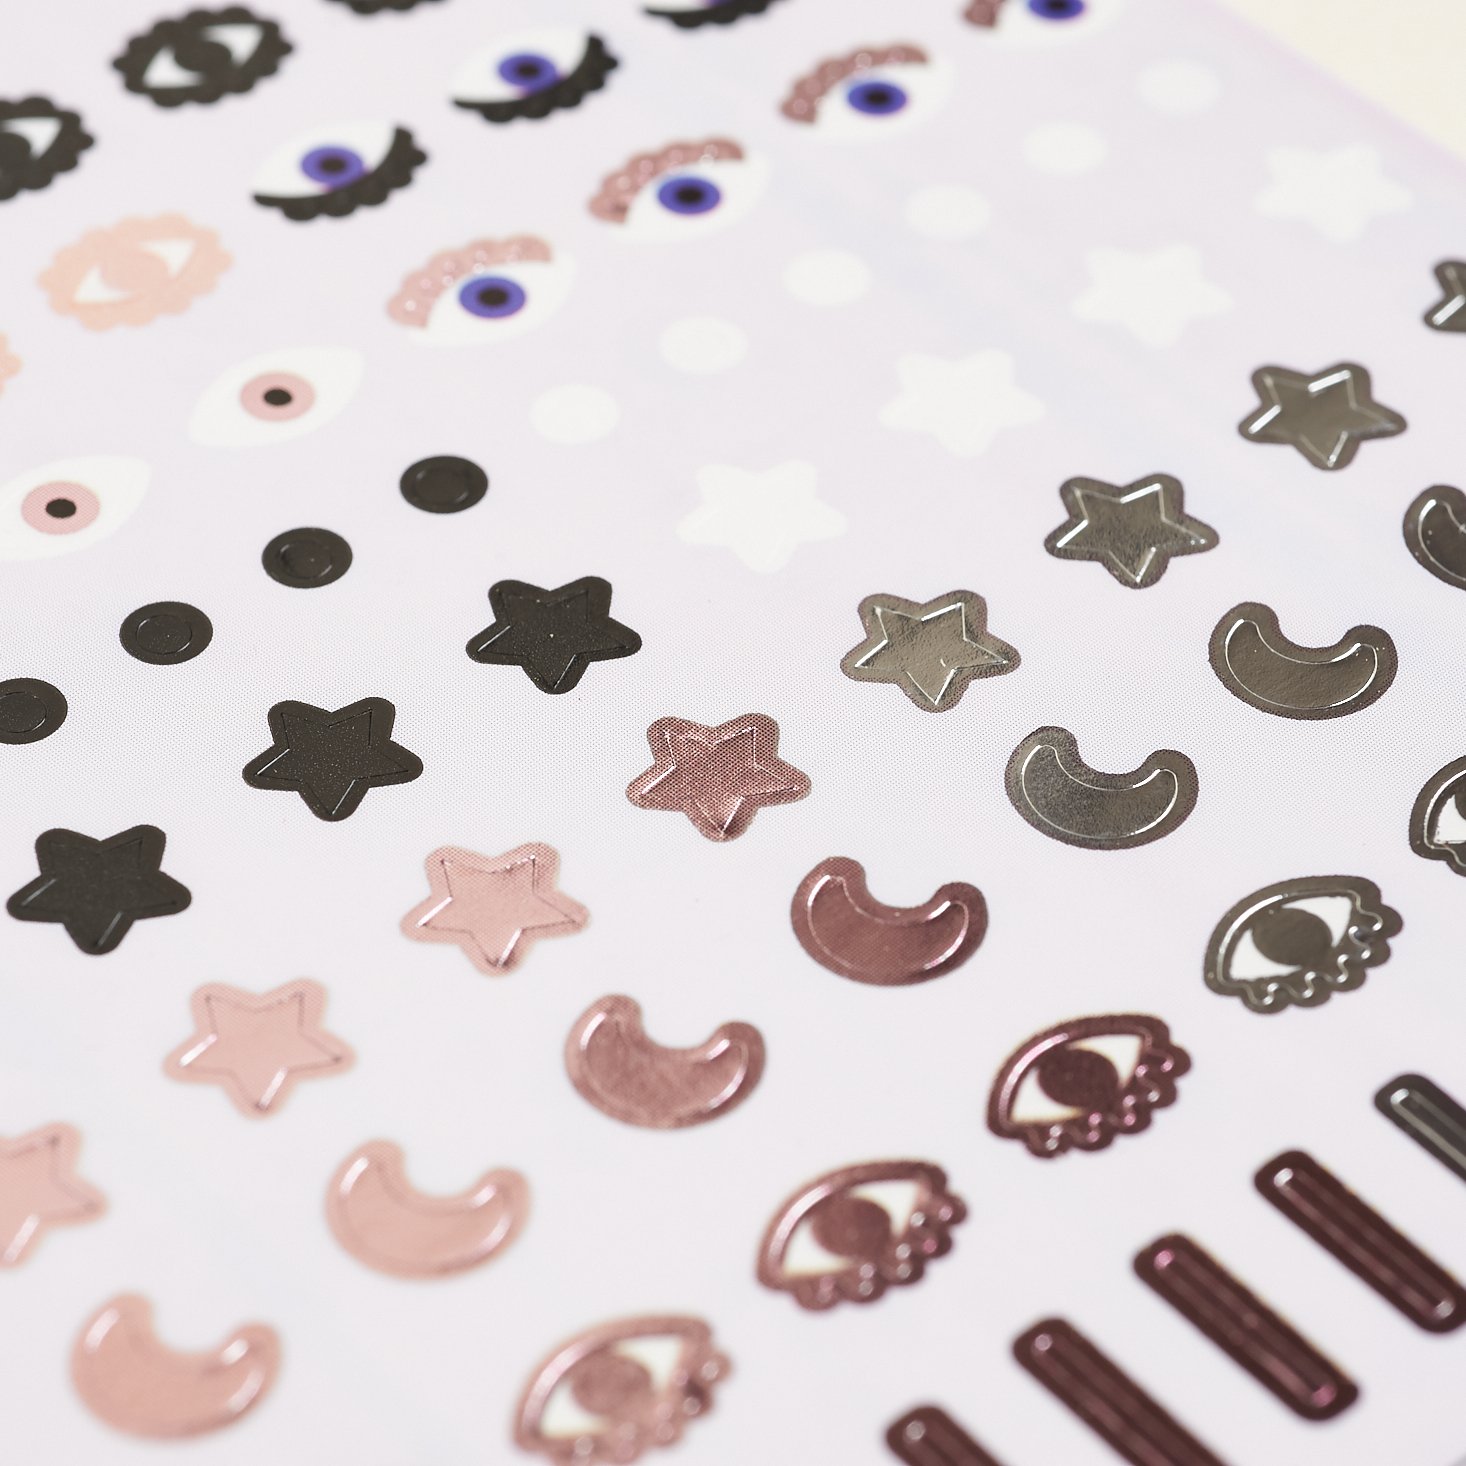 detail of the nail stickers featuring eyes, moons, stars, dots, and metallic stripes